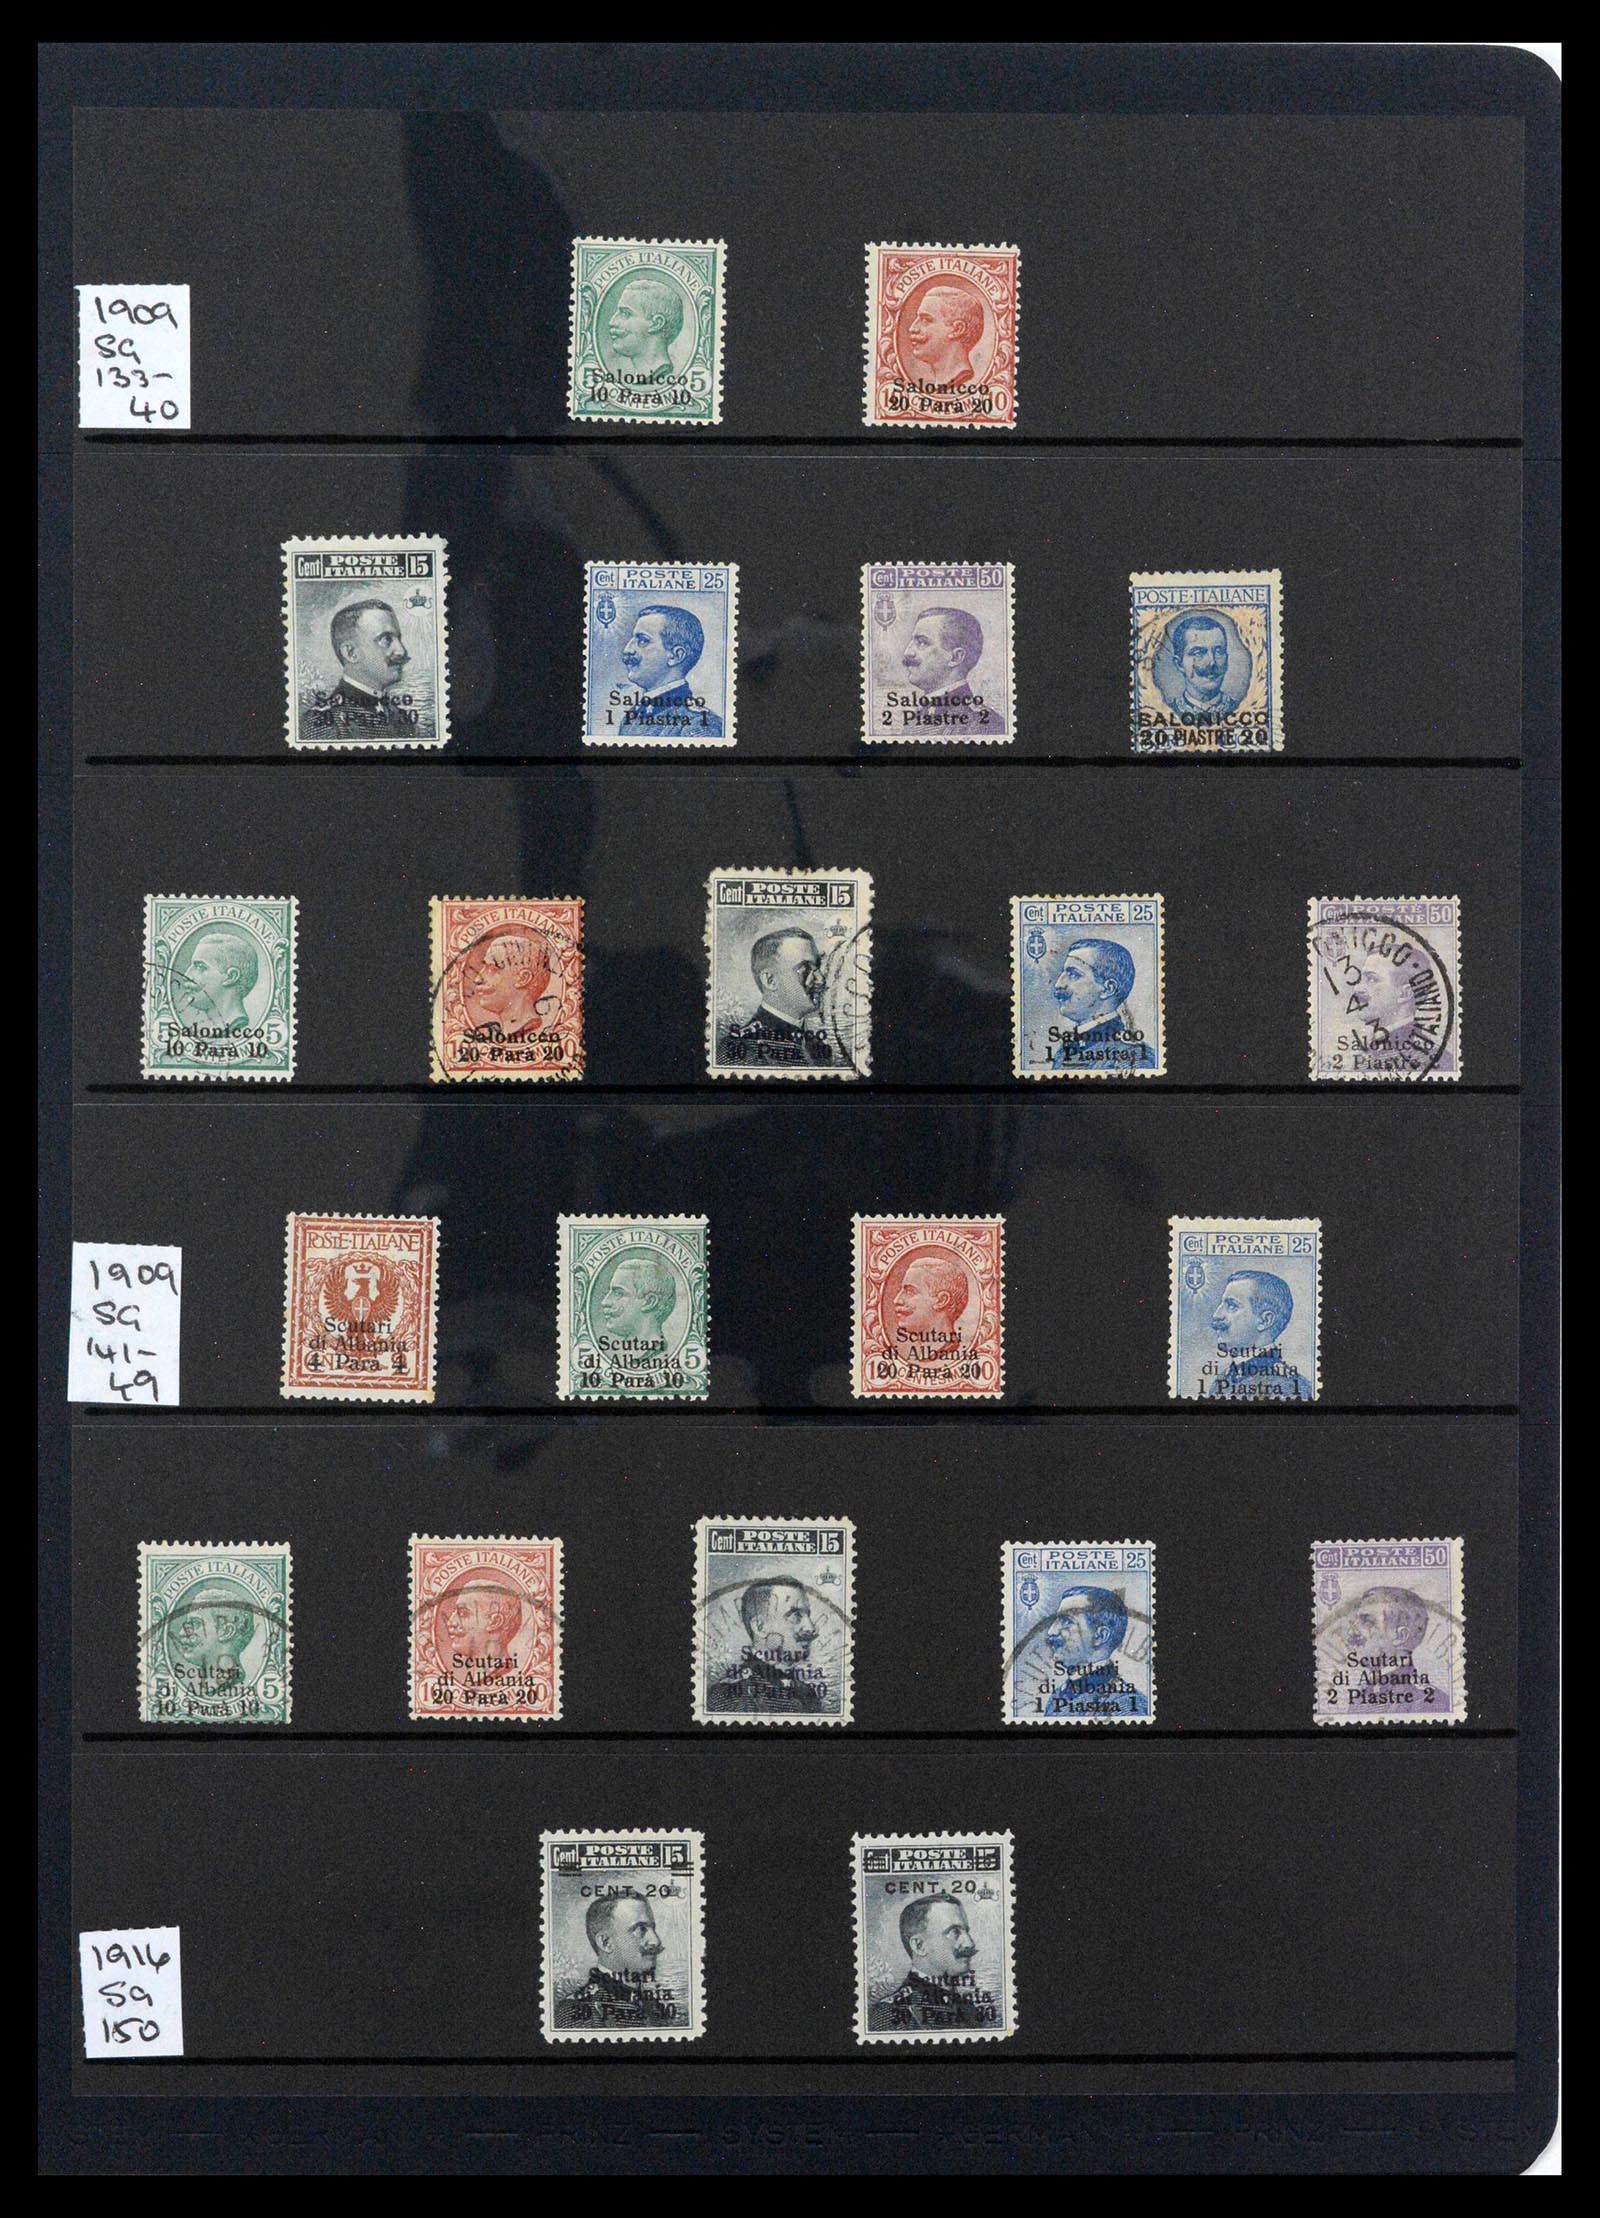 39140 0210 - Stamp collection 39140 Italian colonies 1874-1941.